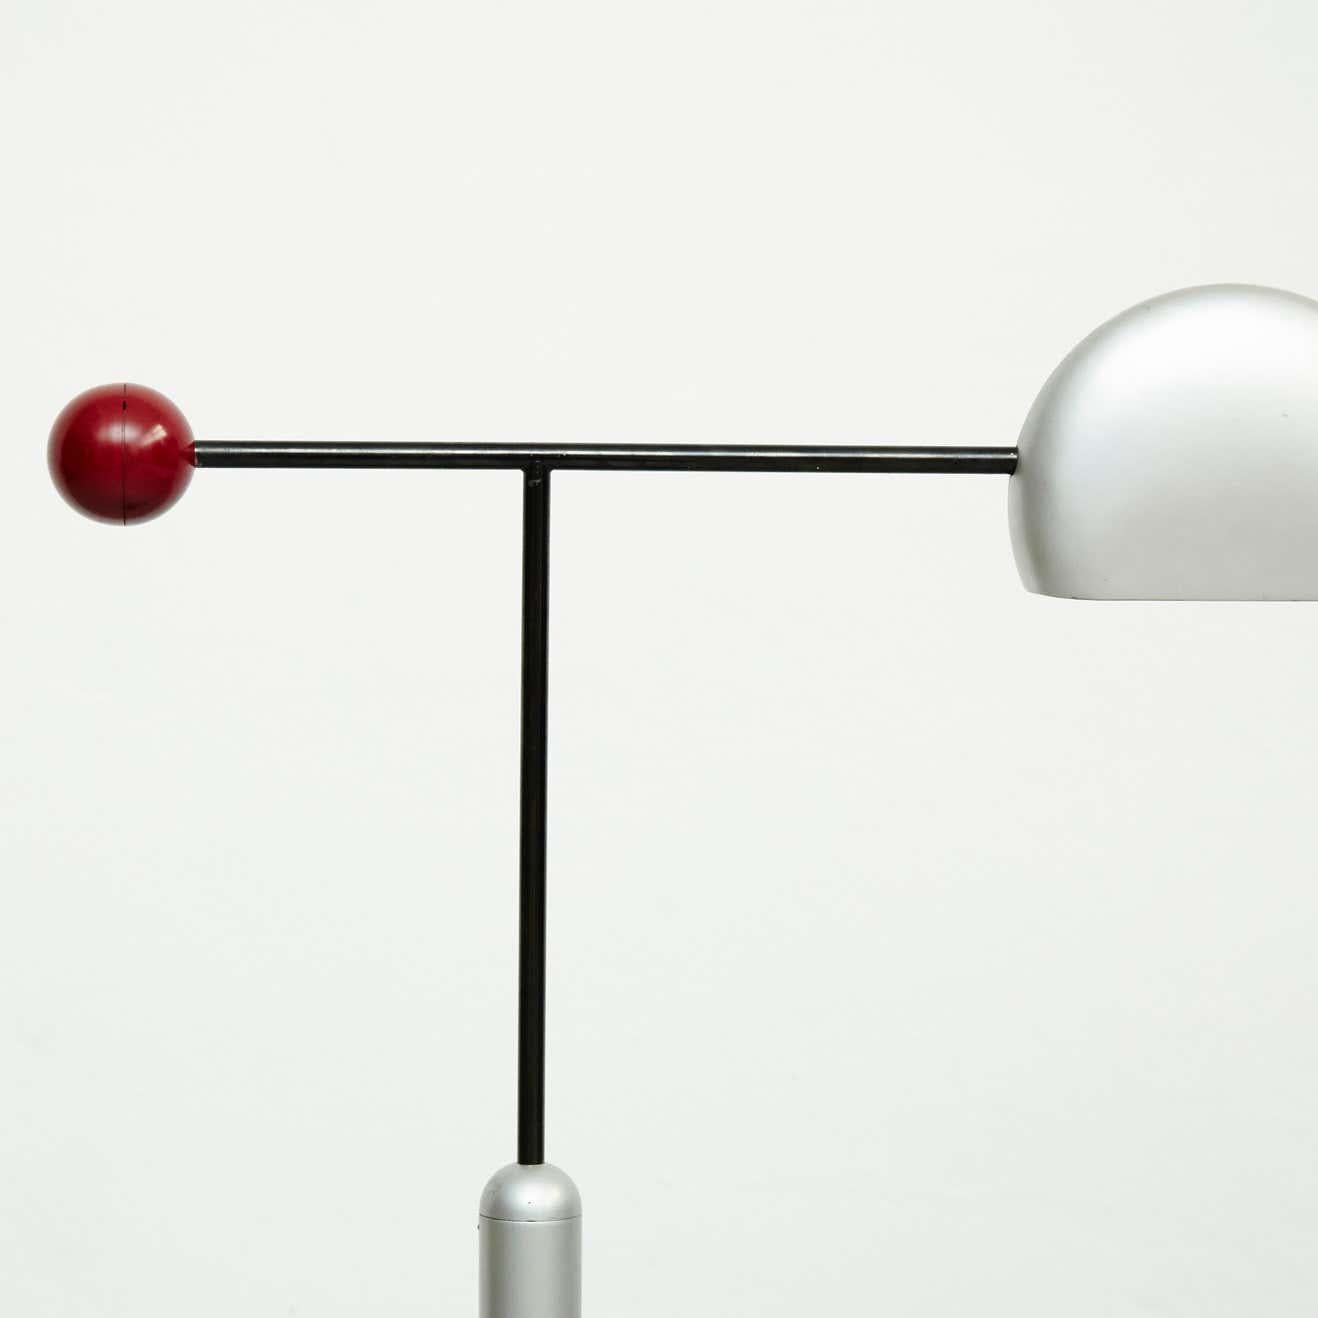 Floor Lamp designed by Toshiyuki Kita, circa 1980.
Manufactured by Luci, Italy.
In original condition, with minor wear consistent with age and use, preserving a beautiful patina.
 
Materials:
Iron
Plastic
Steel

Dimensions:
D 65 cm x W 35 cm x H 142